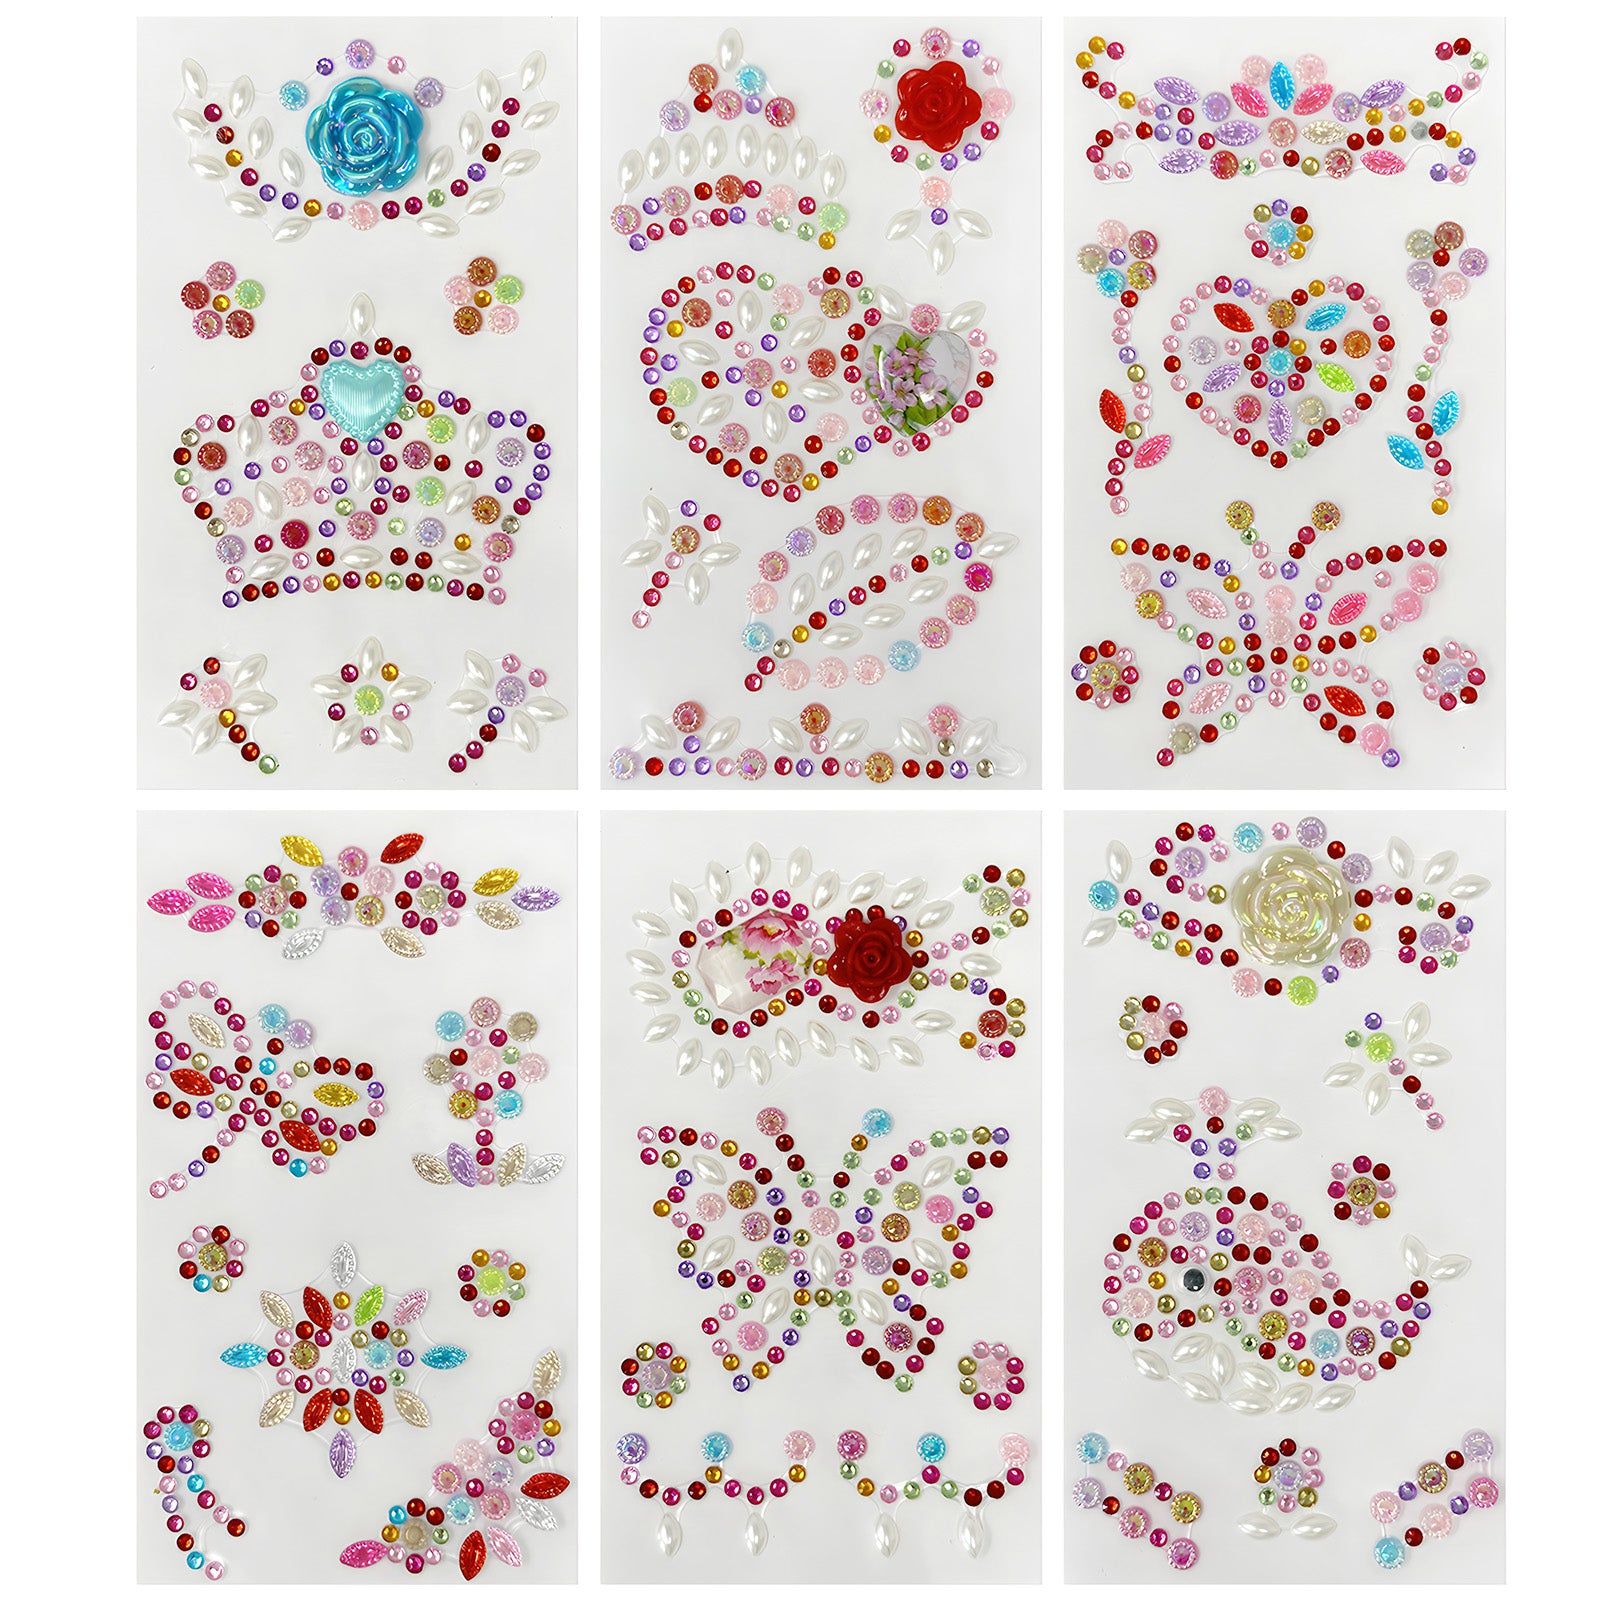 8 Gold Self-Adhesive Rhinestone Number Stickers For DIY Crafts - 6